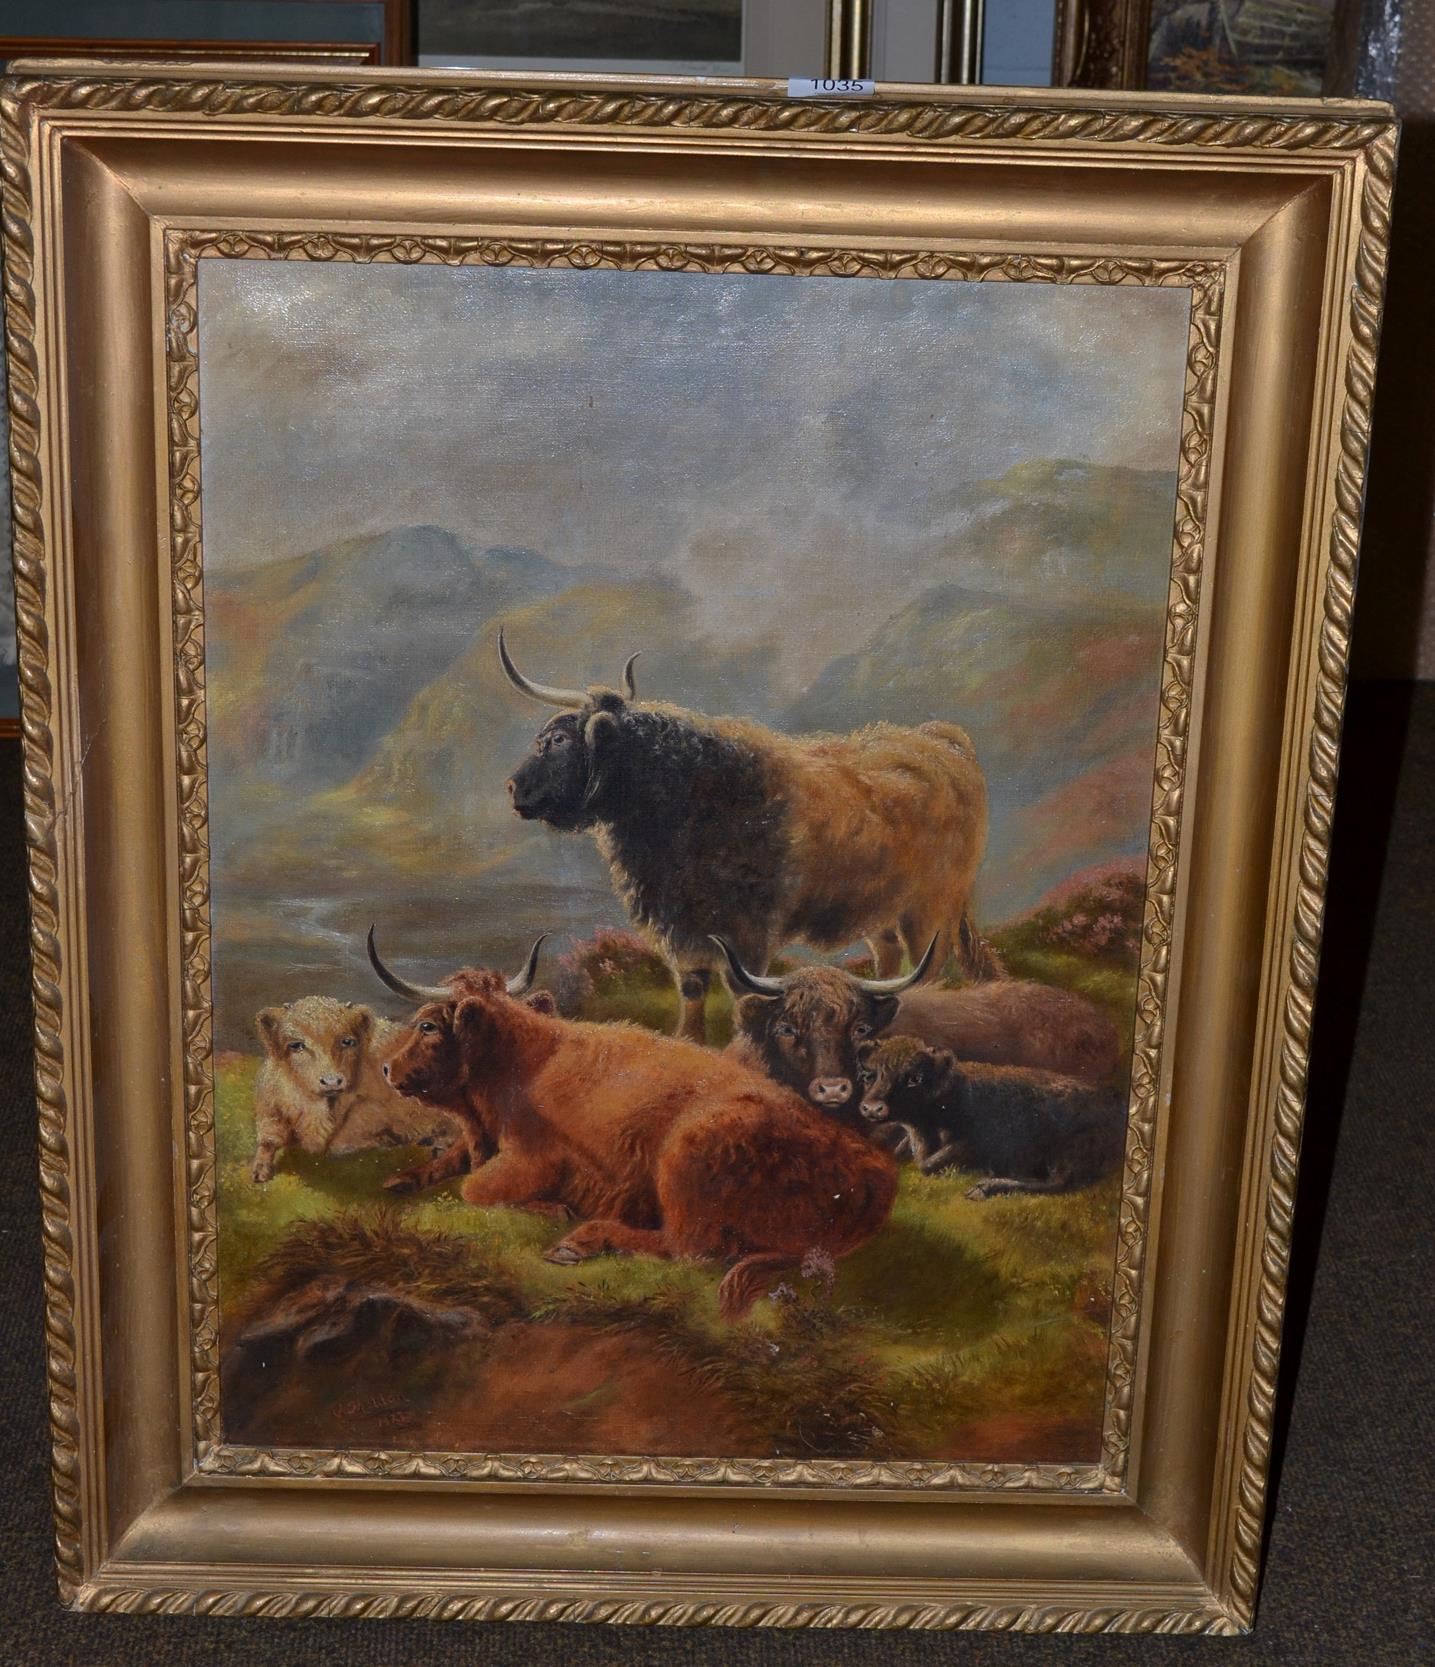 J Shelden (20th century) 'Highland Cattle' signed and dated 1922, oil on canvas, 60cm by 45cm